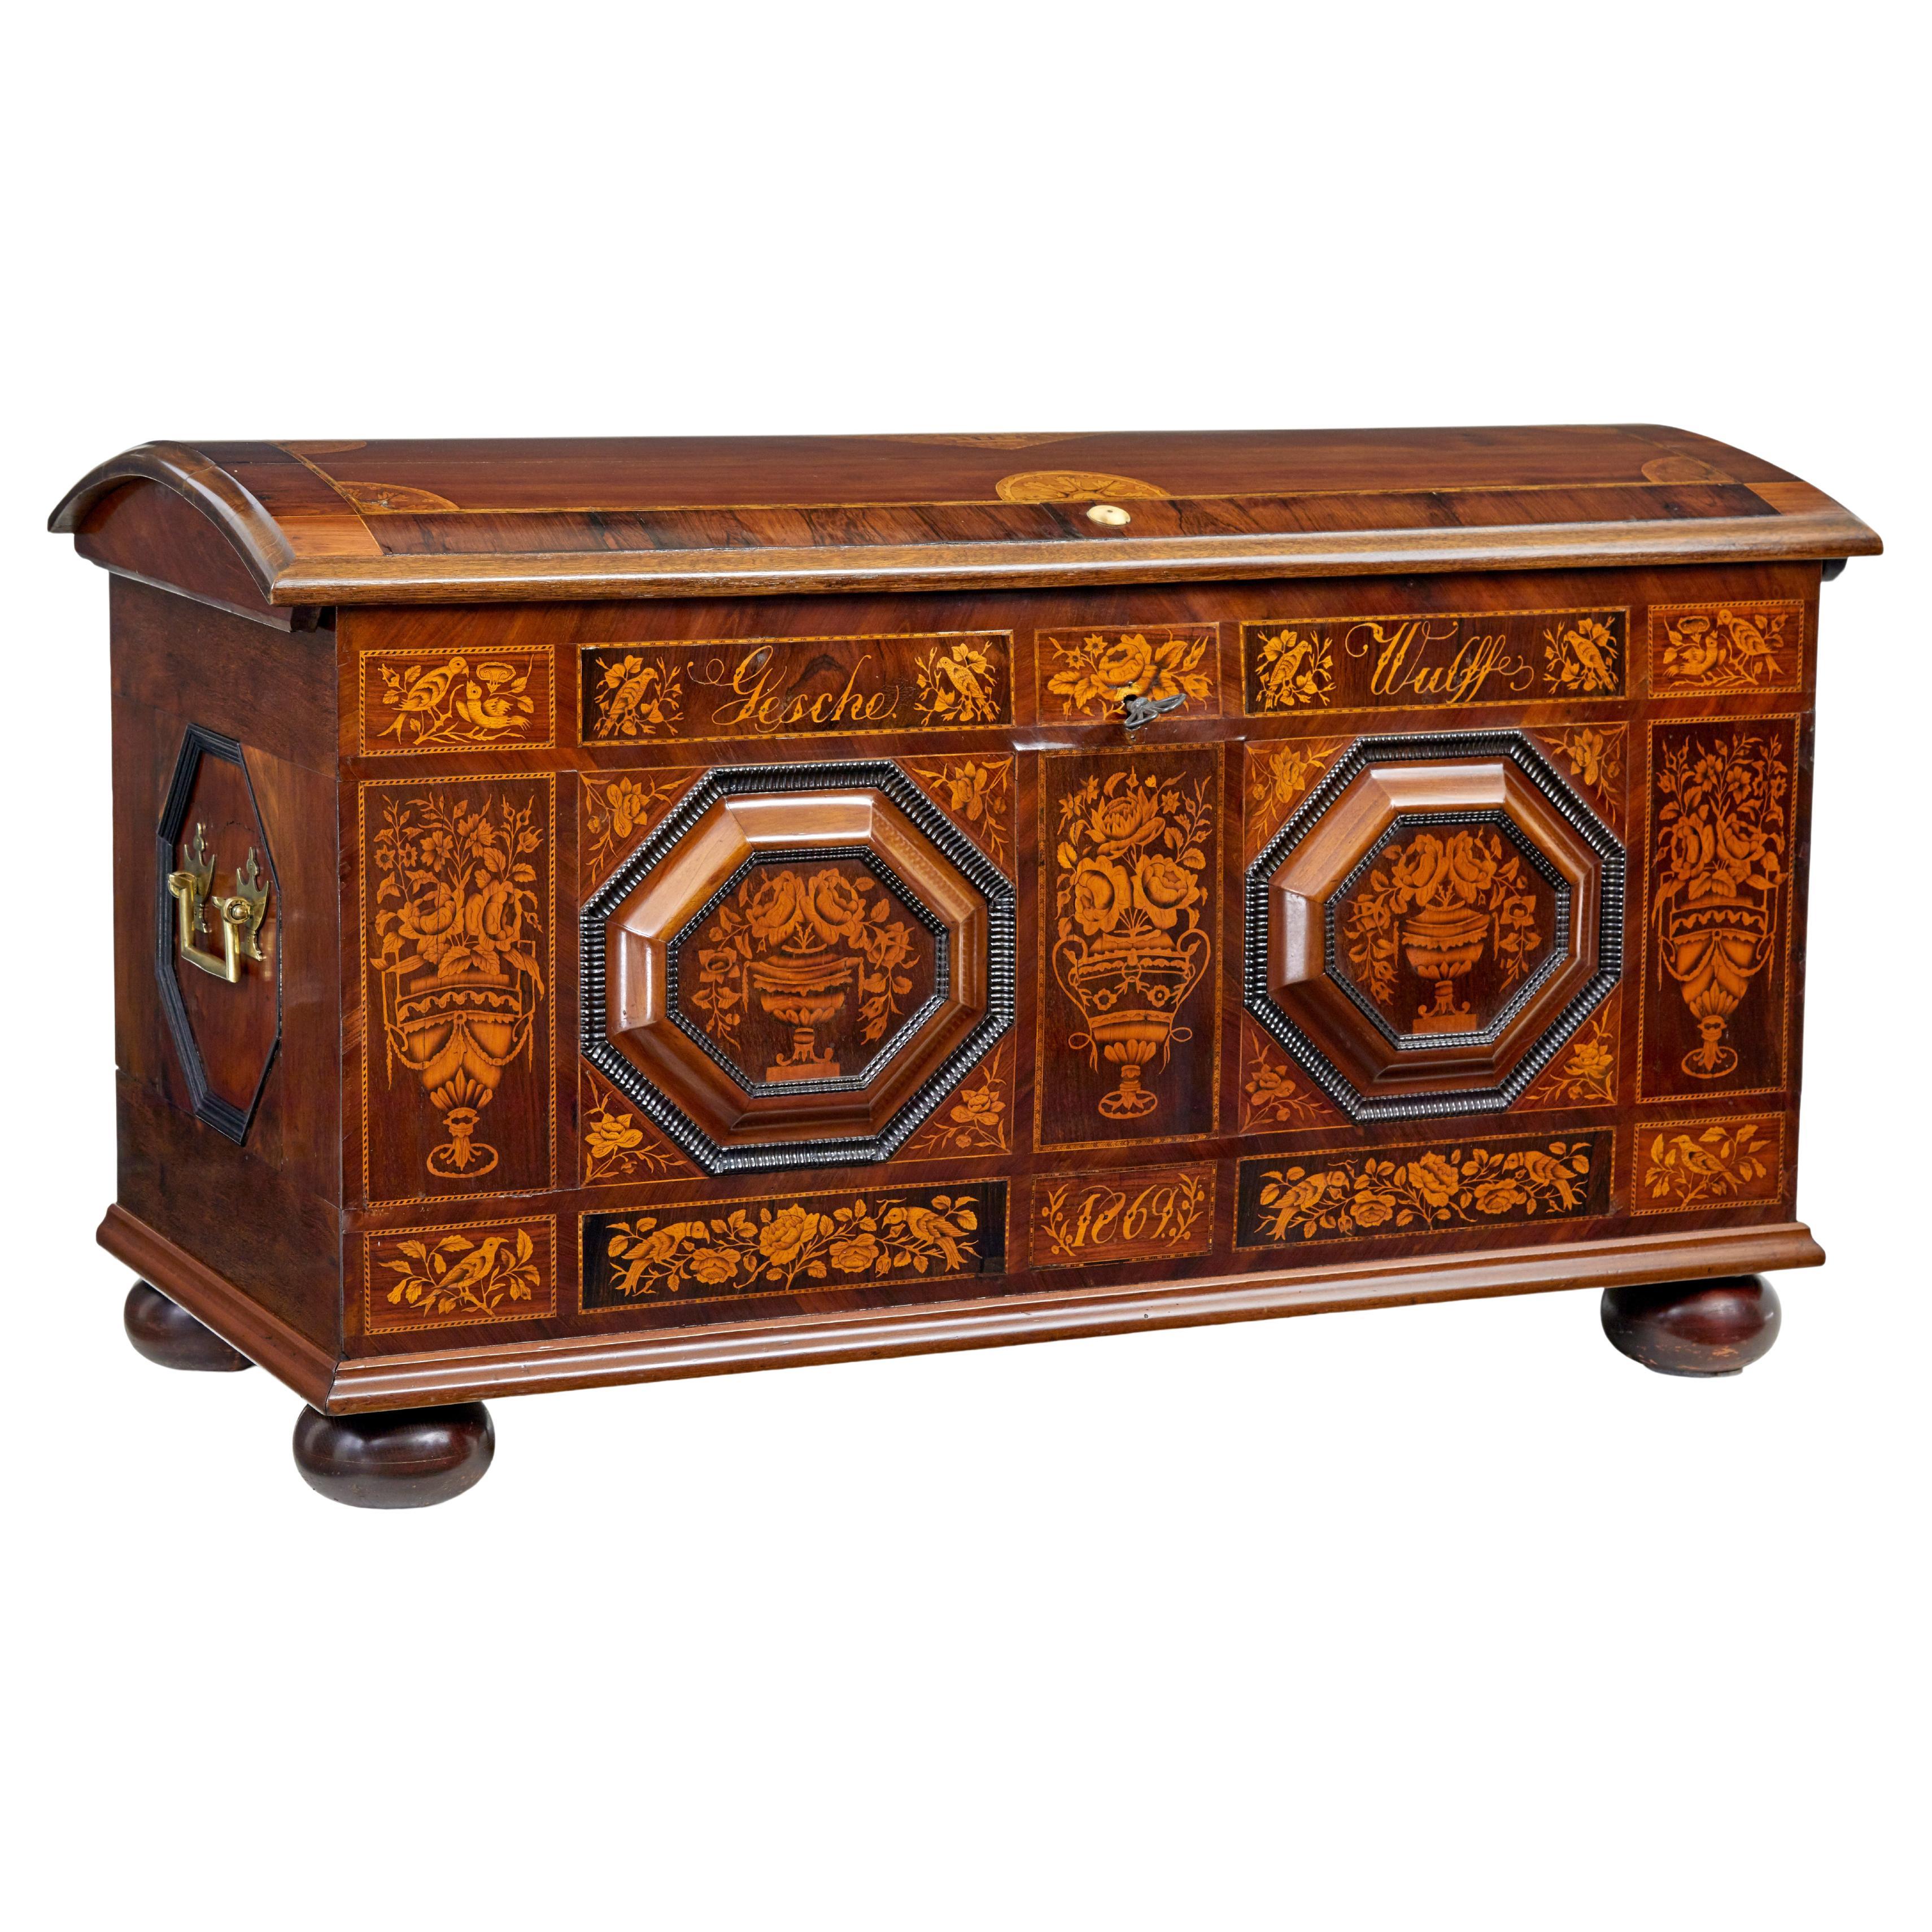 Mid 19th century profusely inlaid continental walnut dome coffer